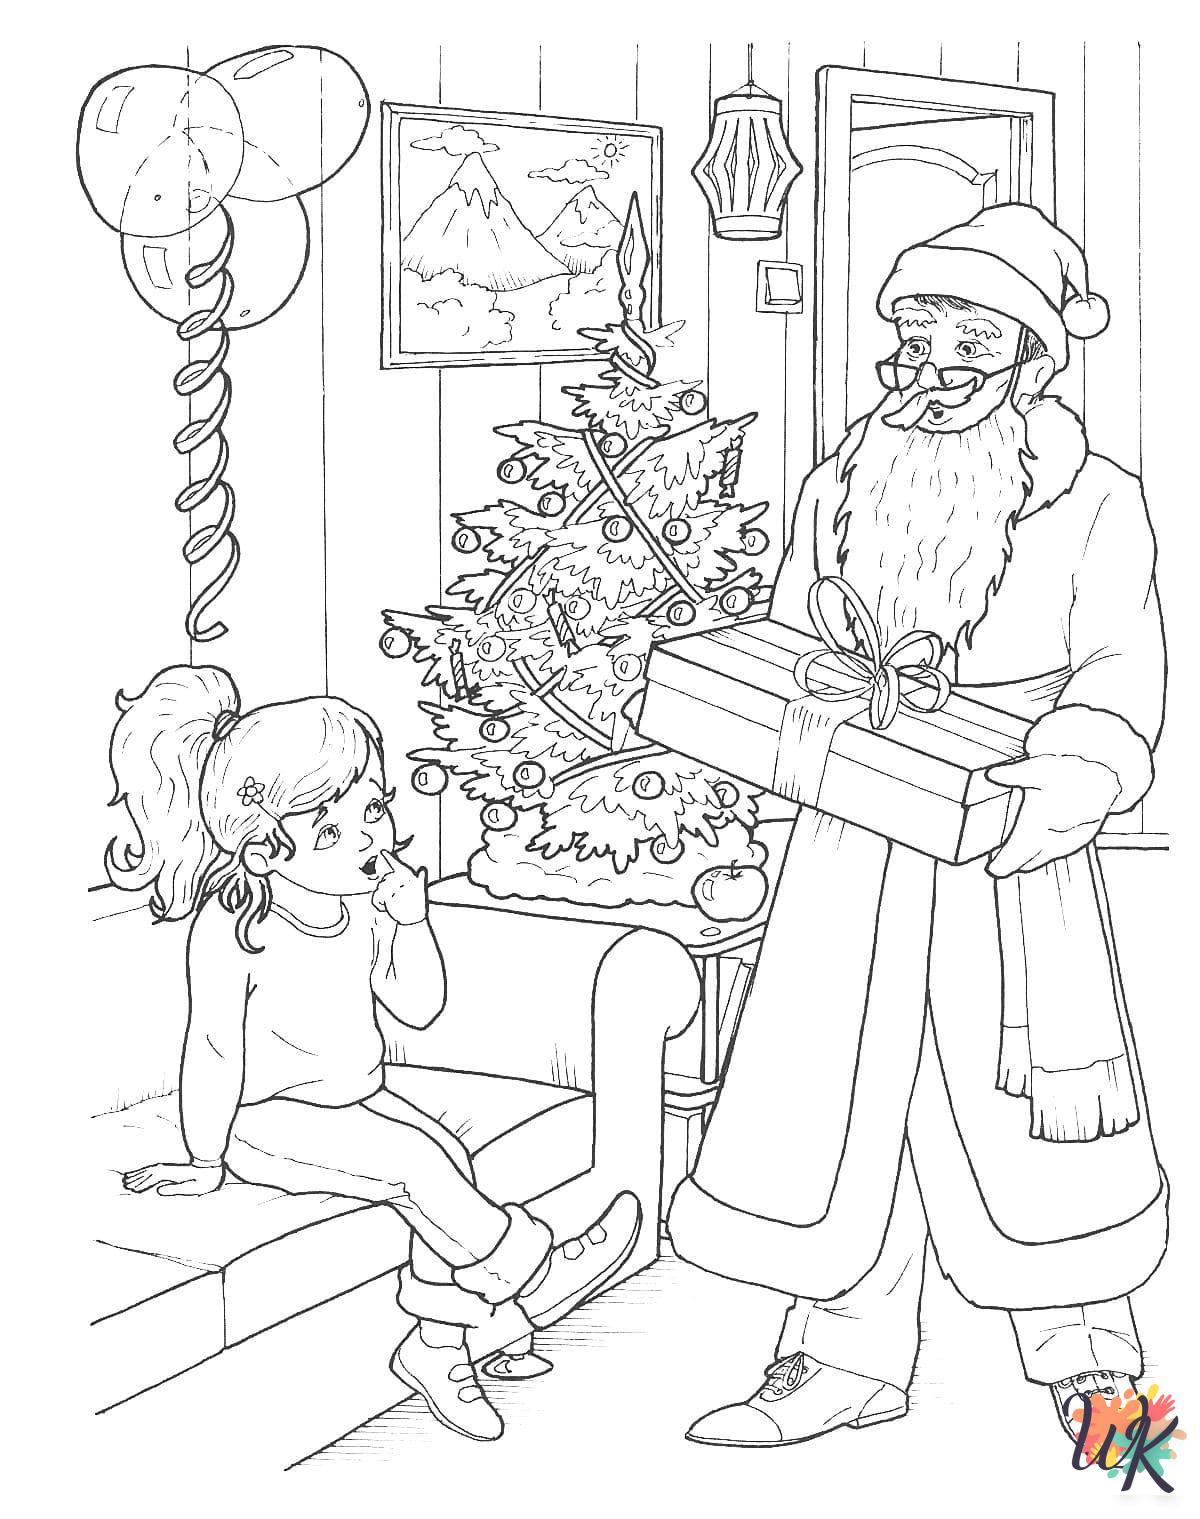 Santa coloring pages easy